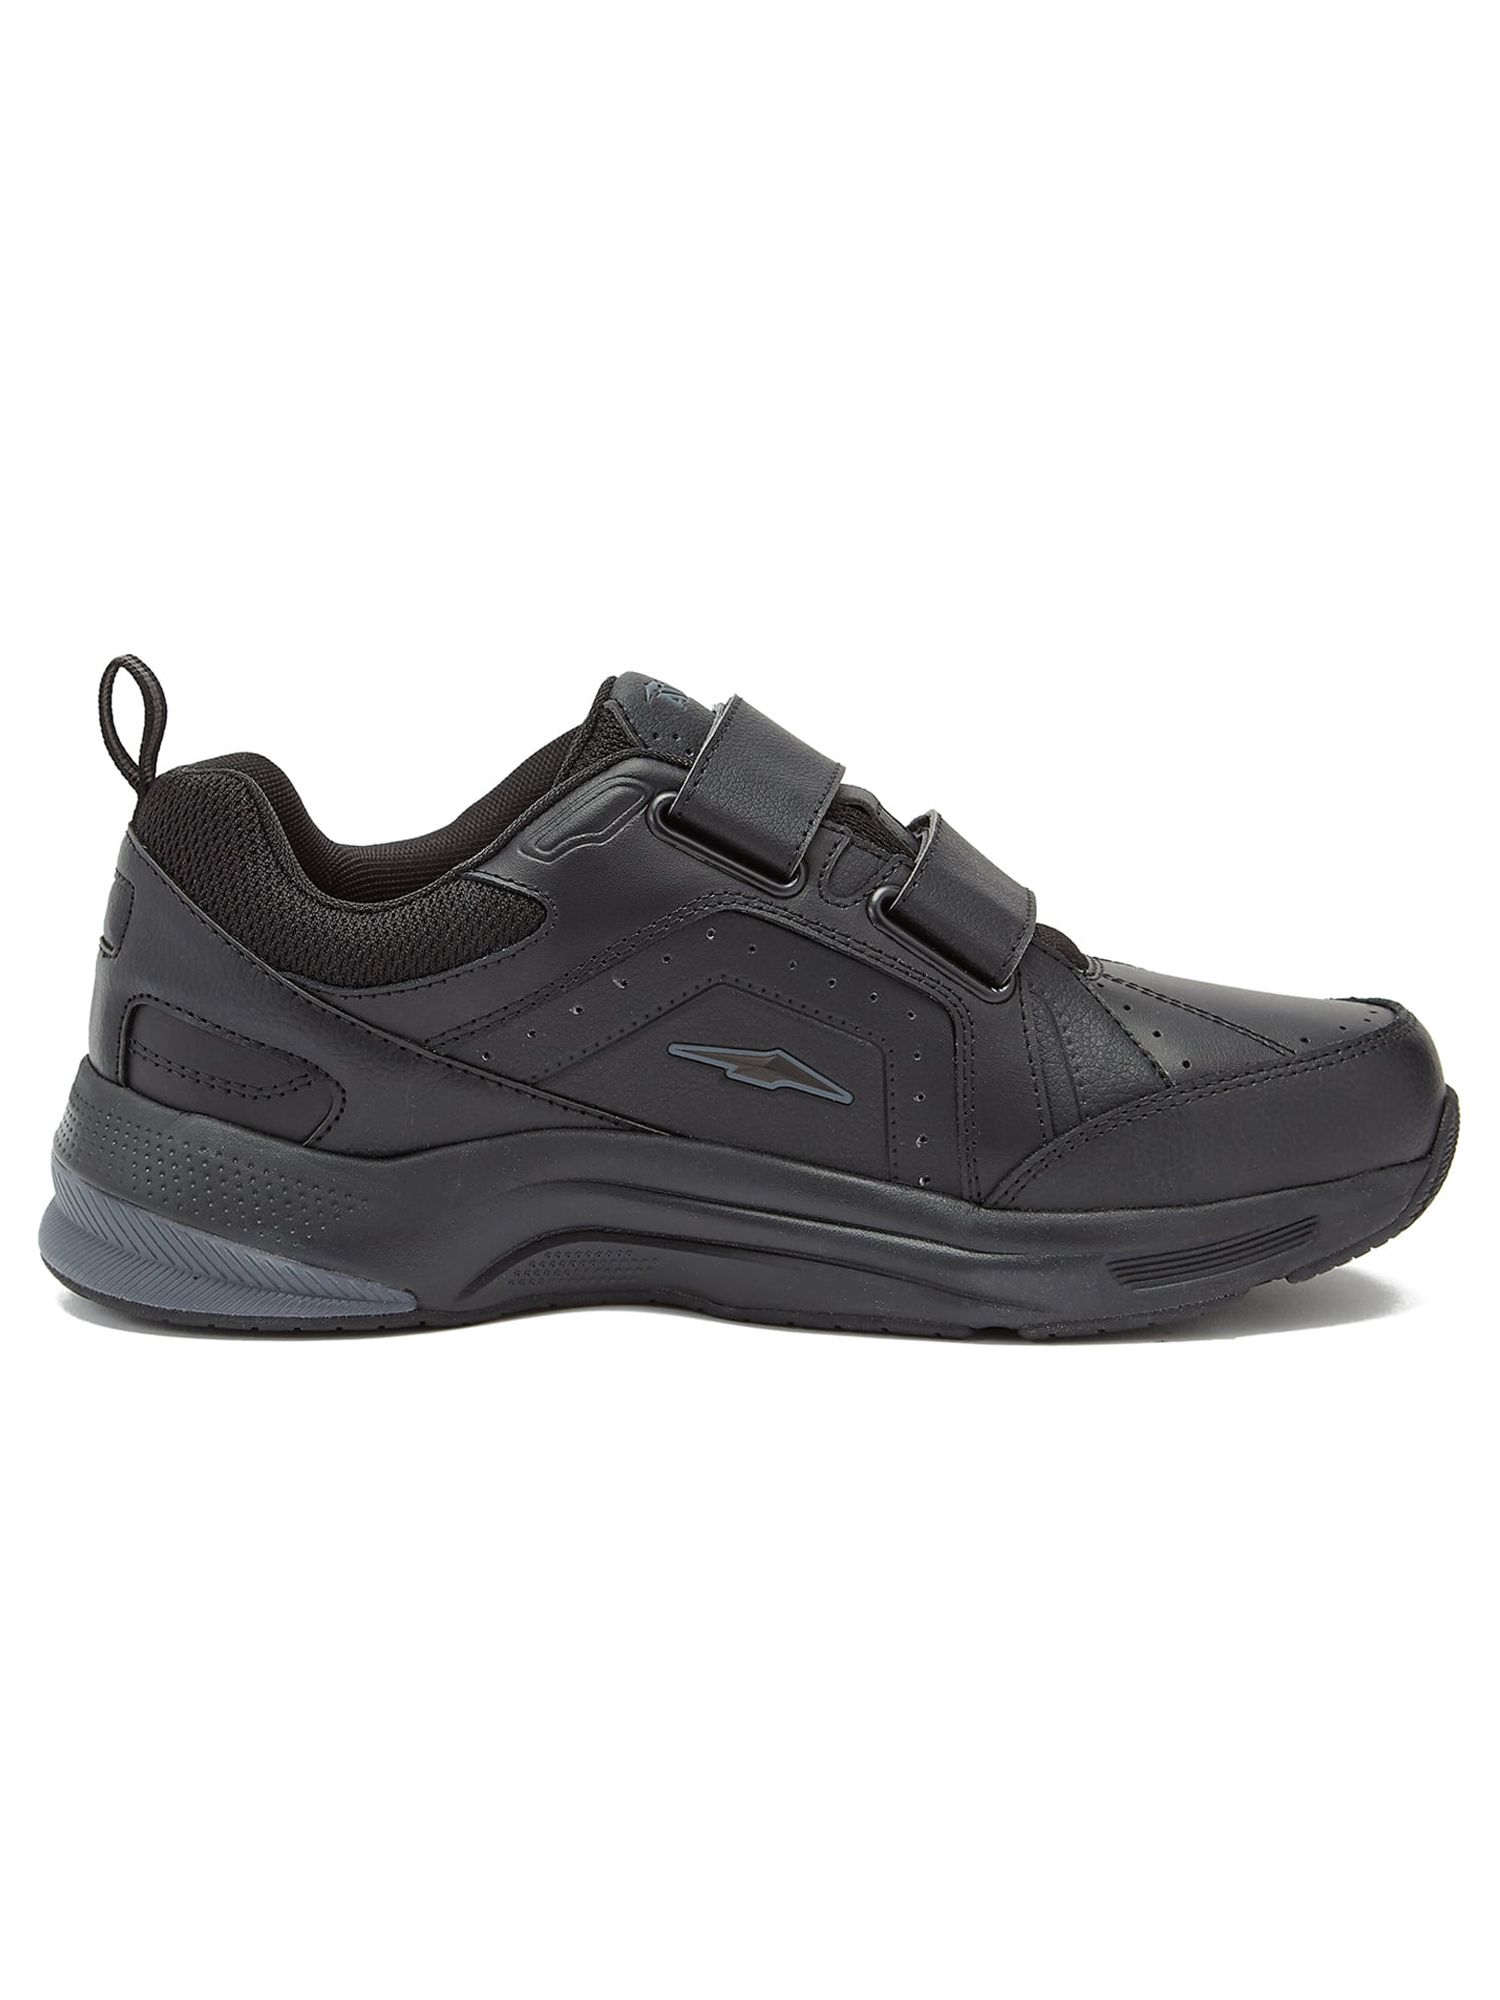 Avia Men's Quickstep Strap Wide Width Walking Shoes - image 2 of 5